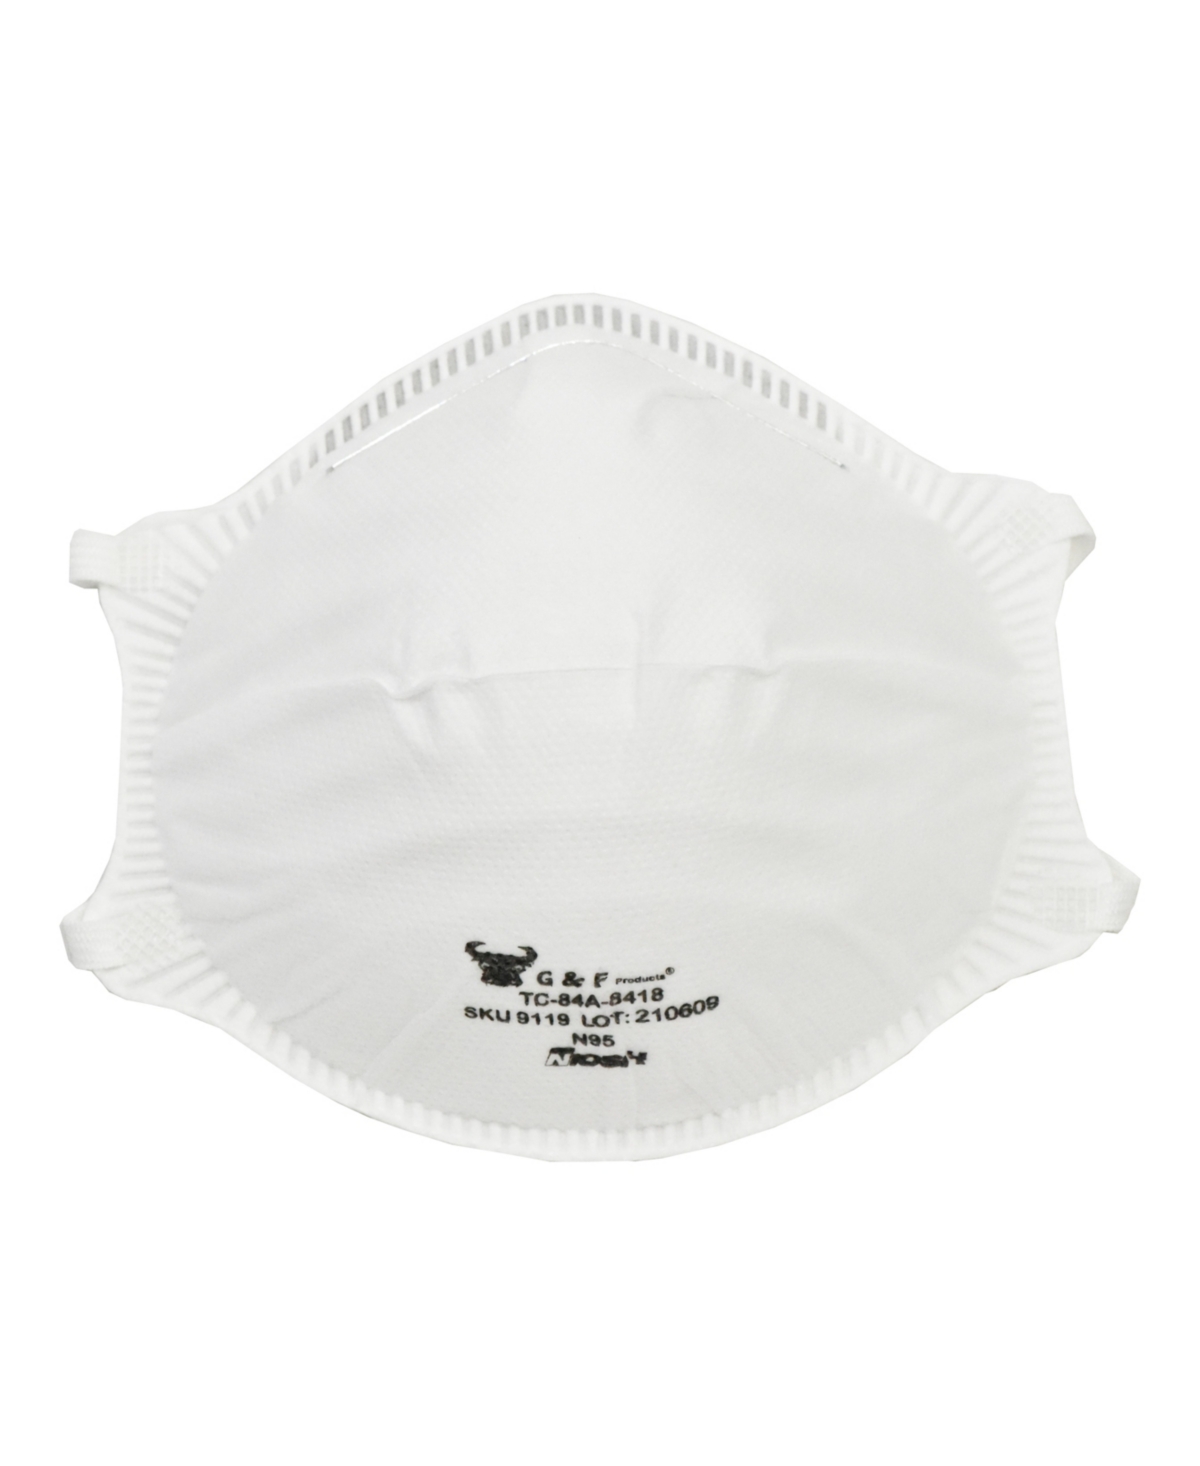 N95 Particulate Respirator Dust Mask, 20 Pieces - White